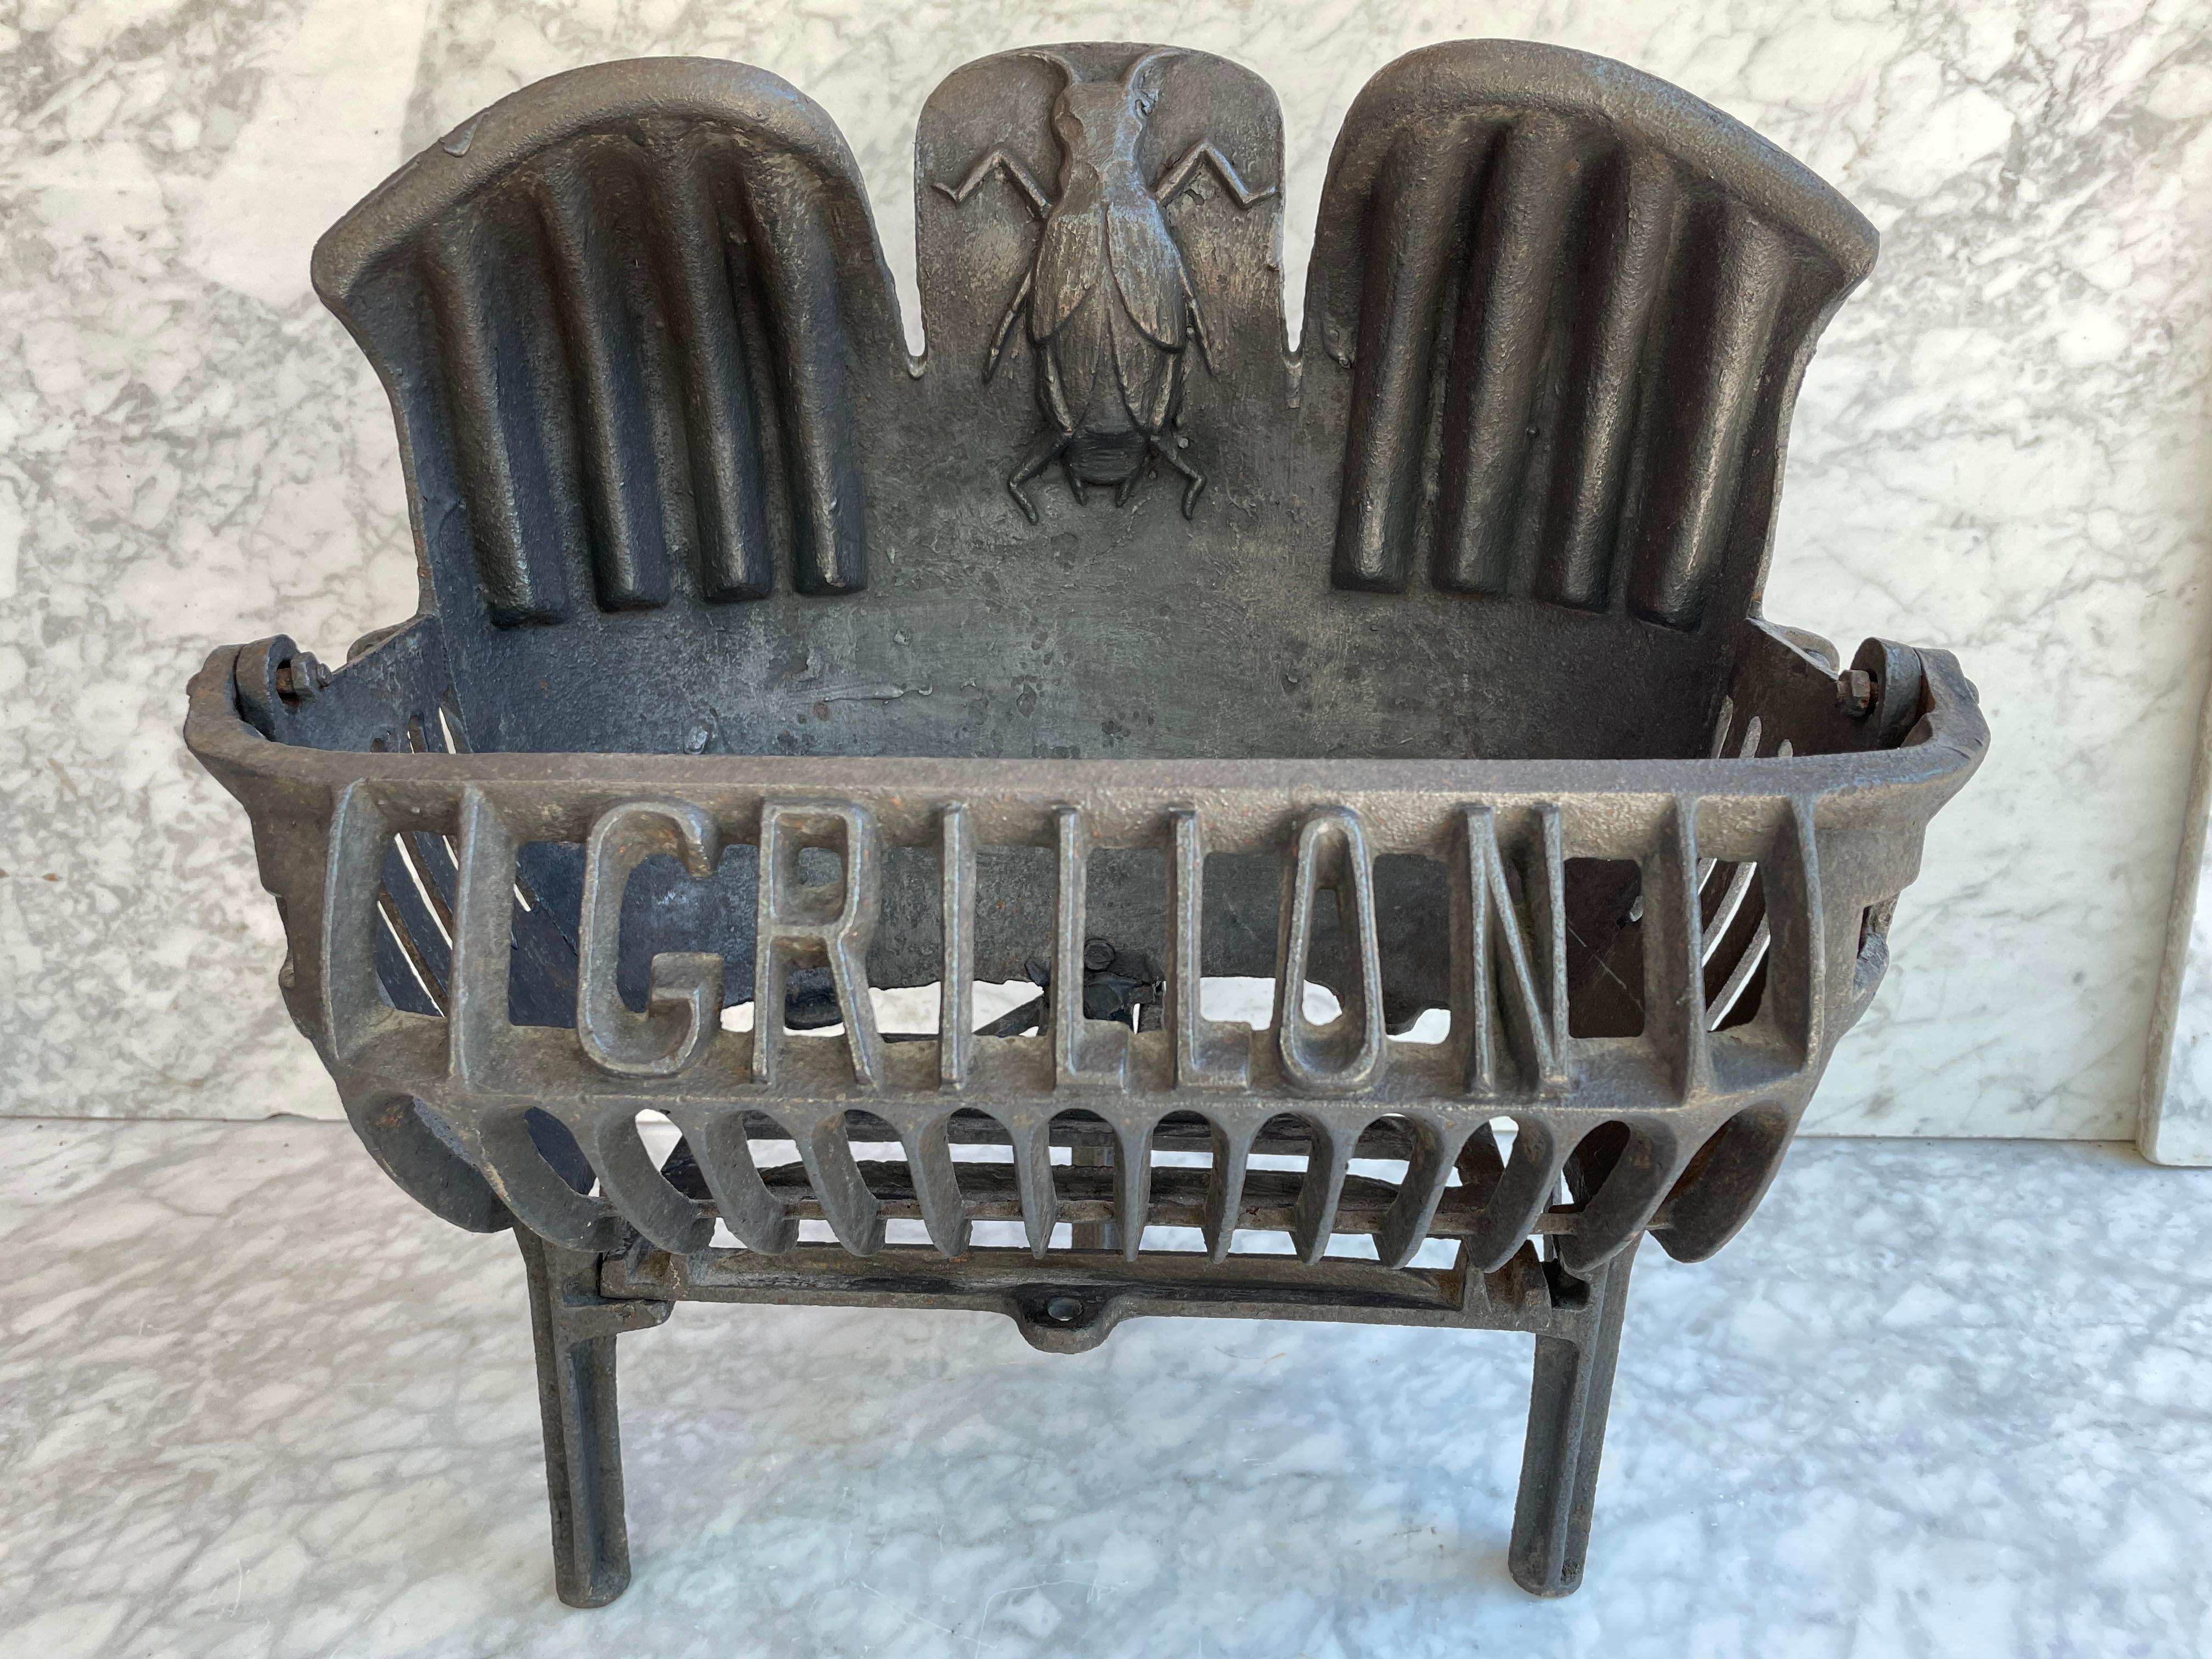 Antique cast iron fireplace grate or basket 